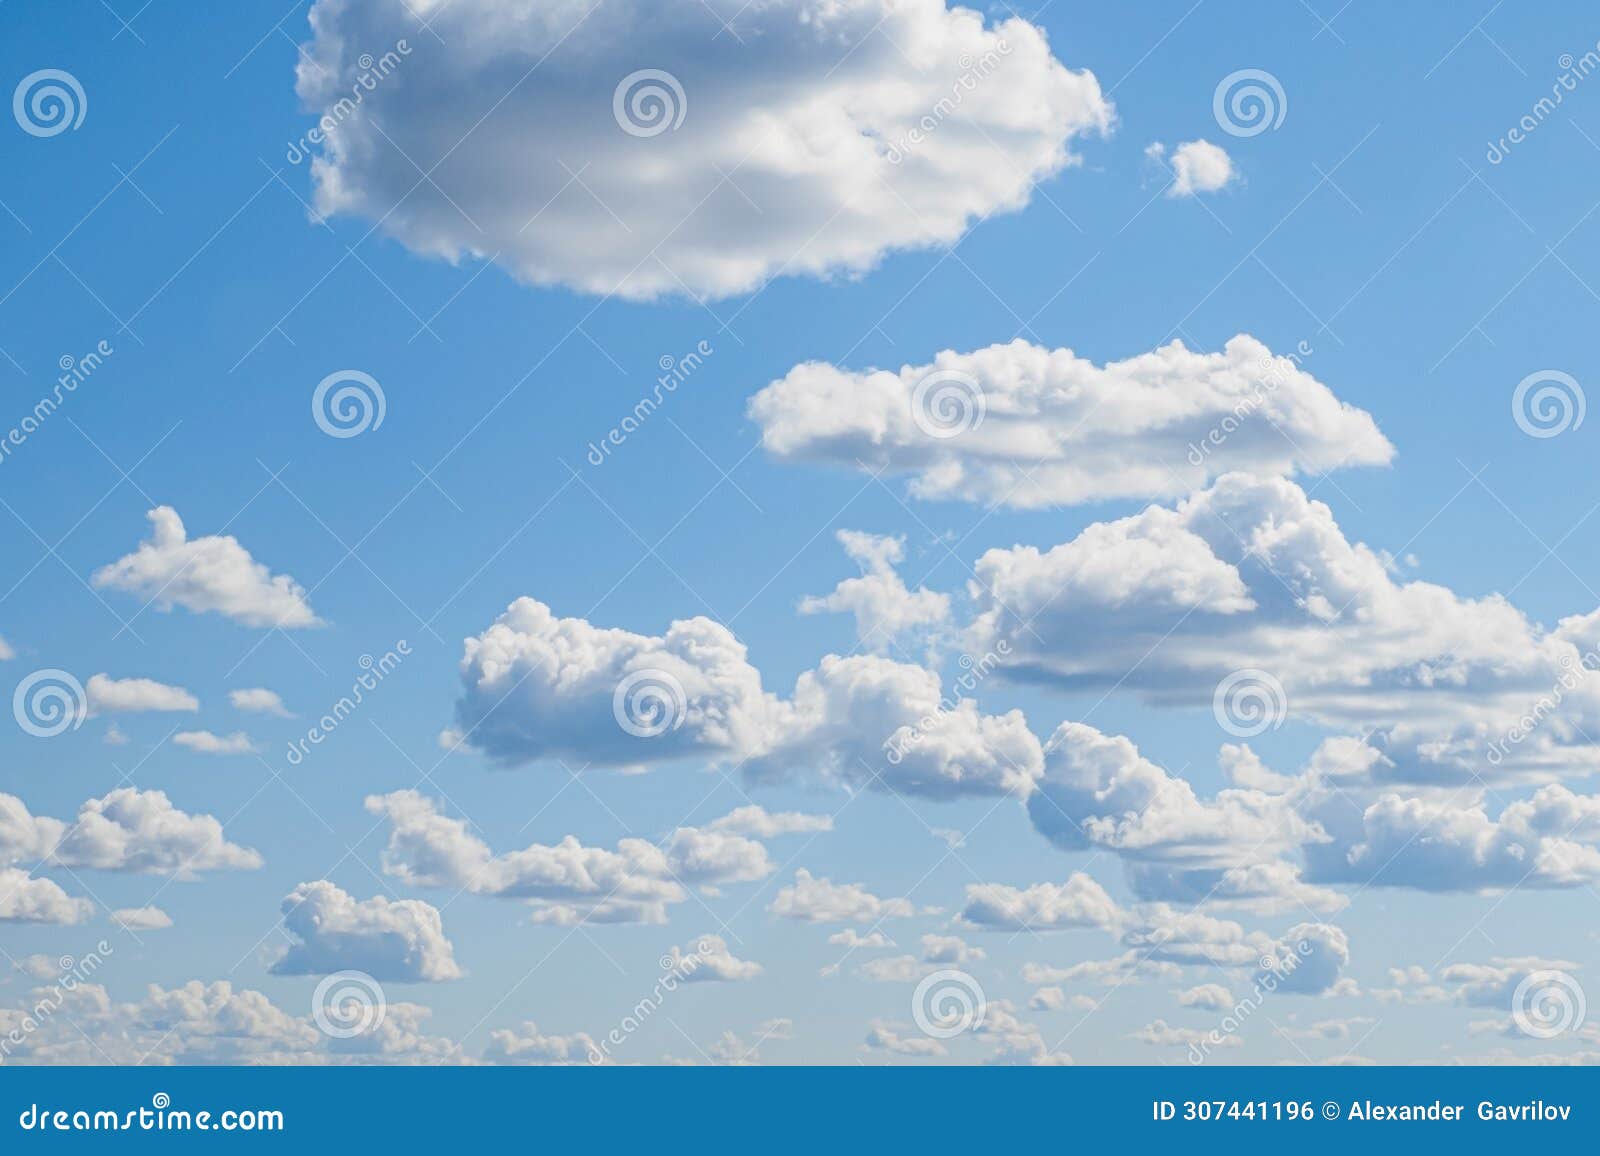 sky and clouds. the airspace. atmospheric mood. environment